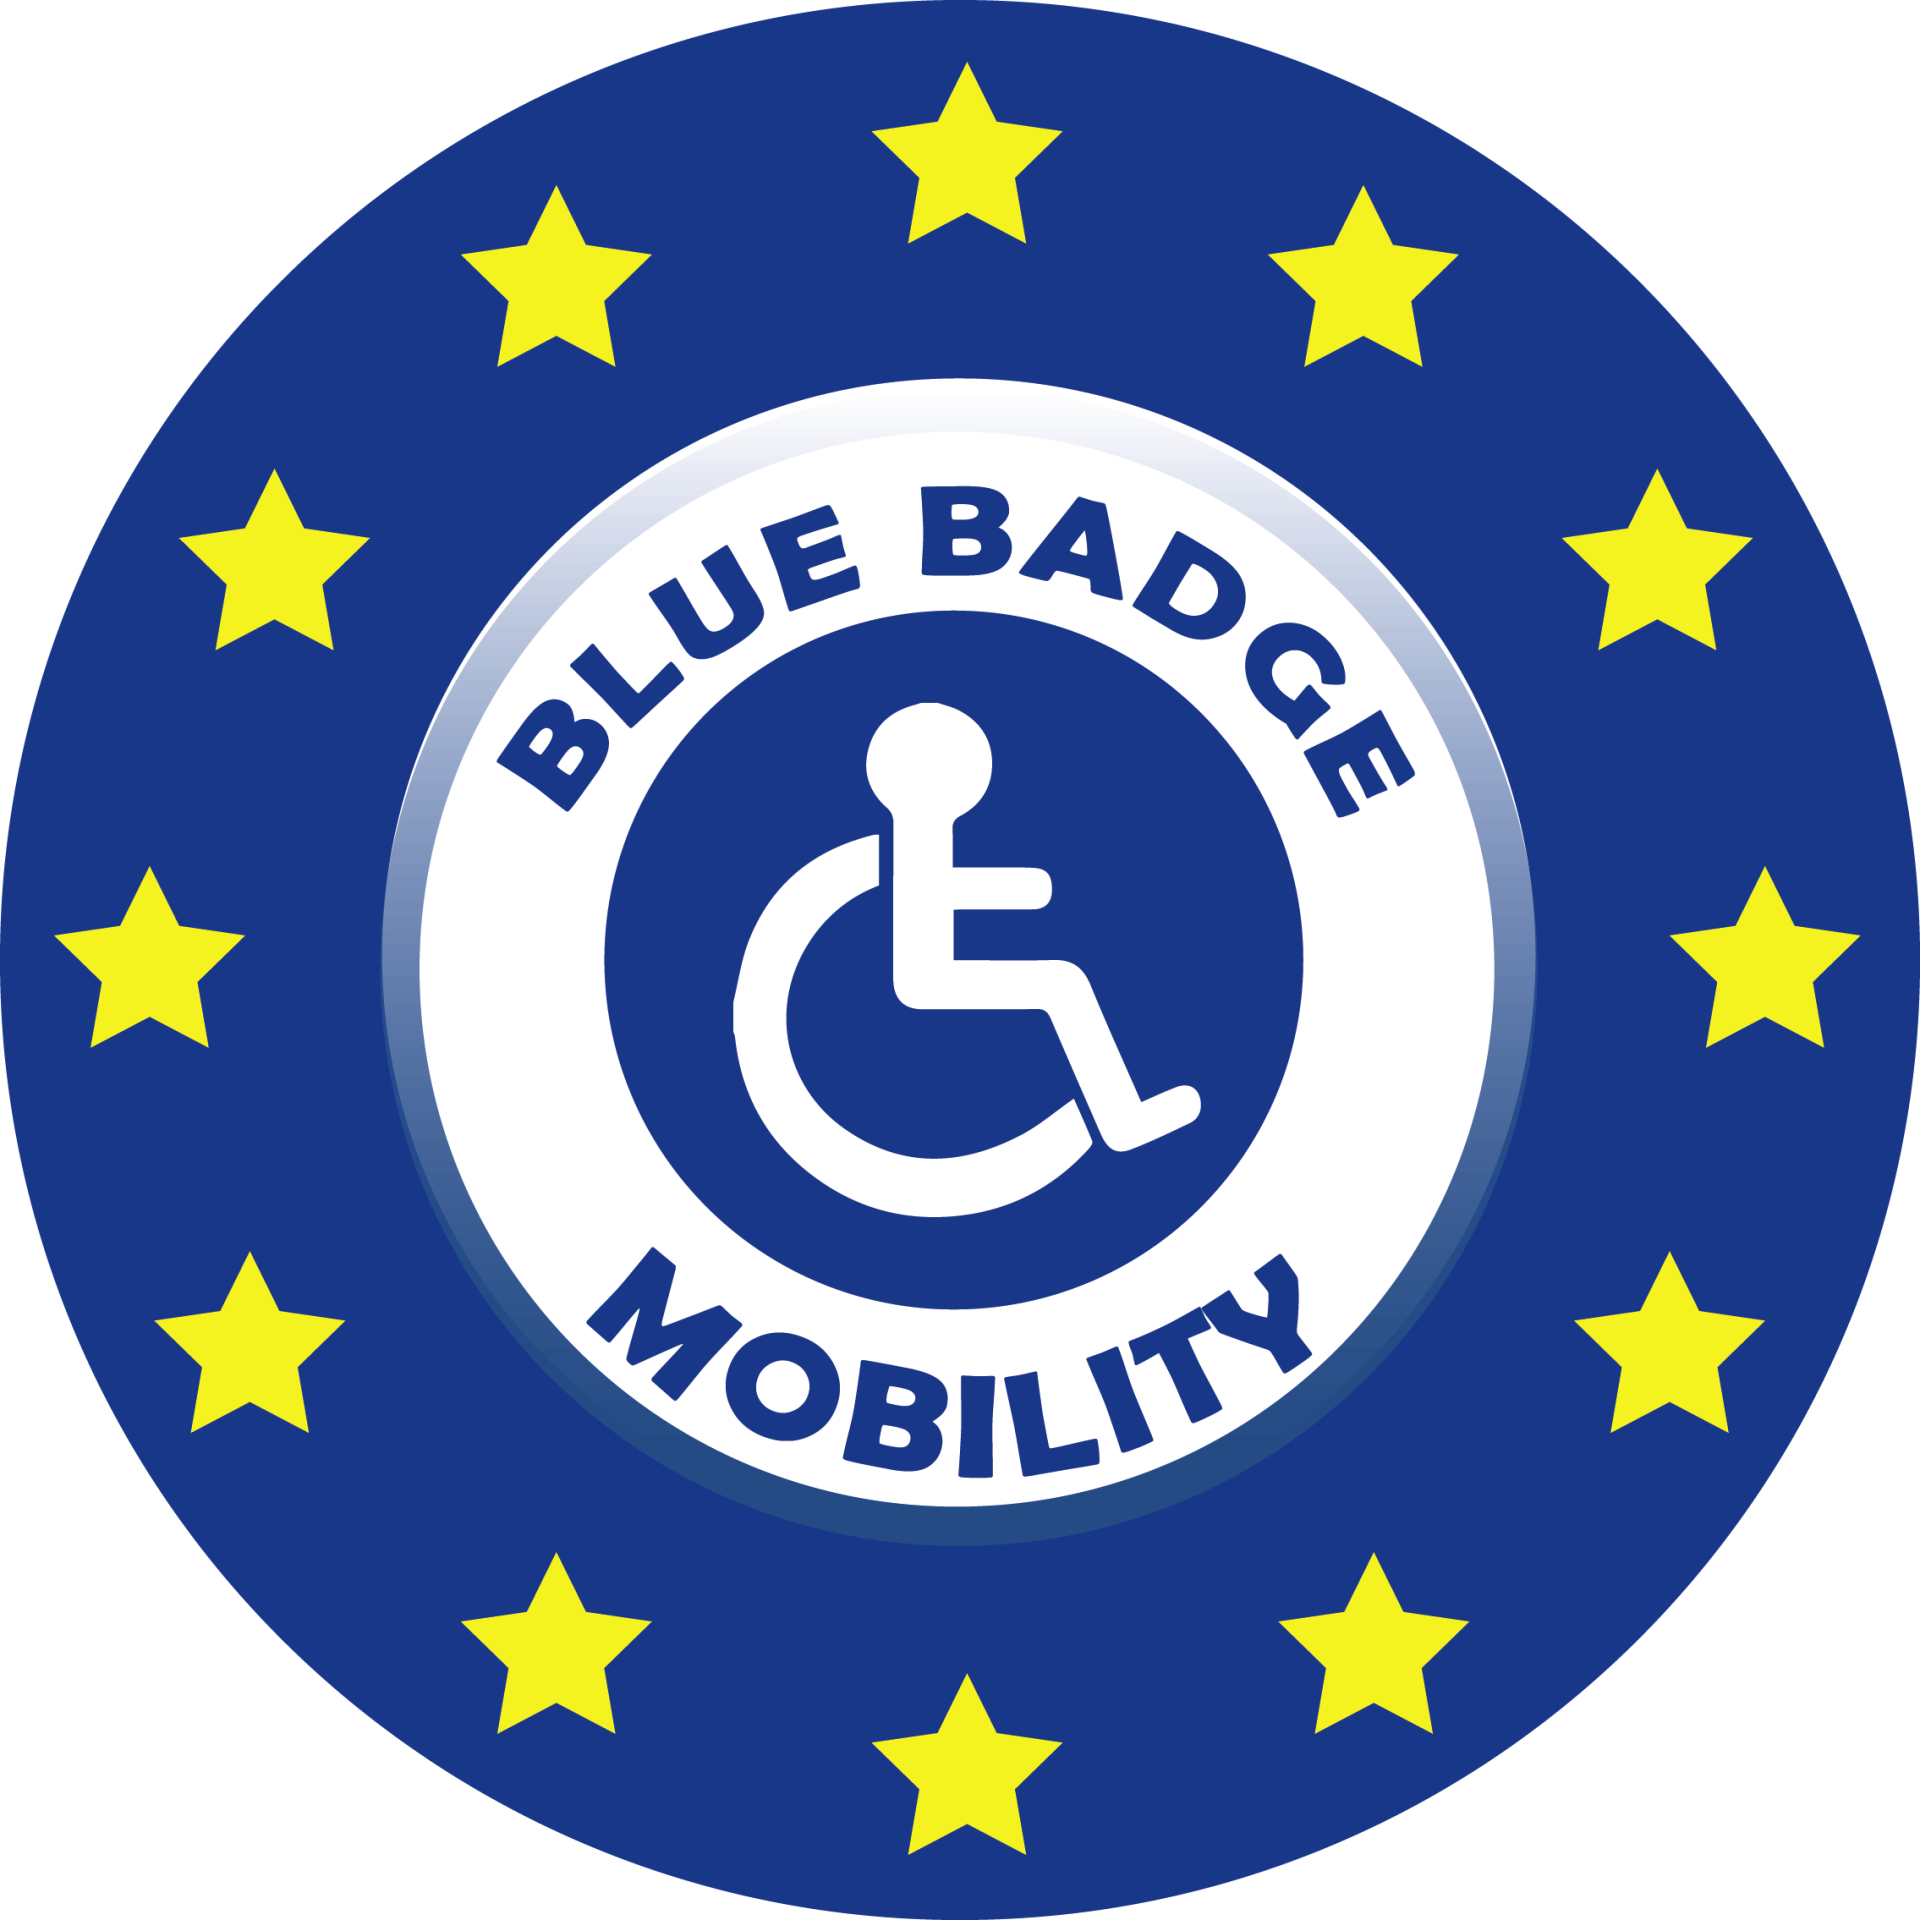 our blue badge mobility logo